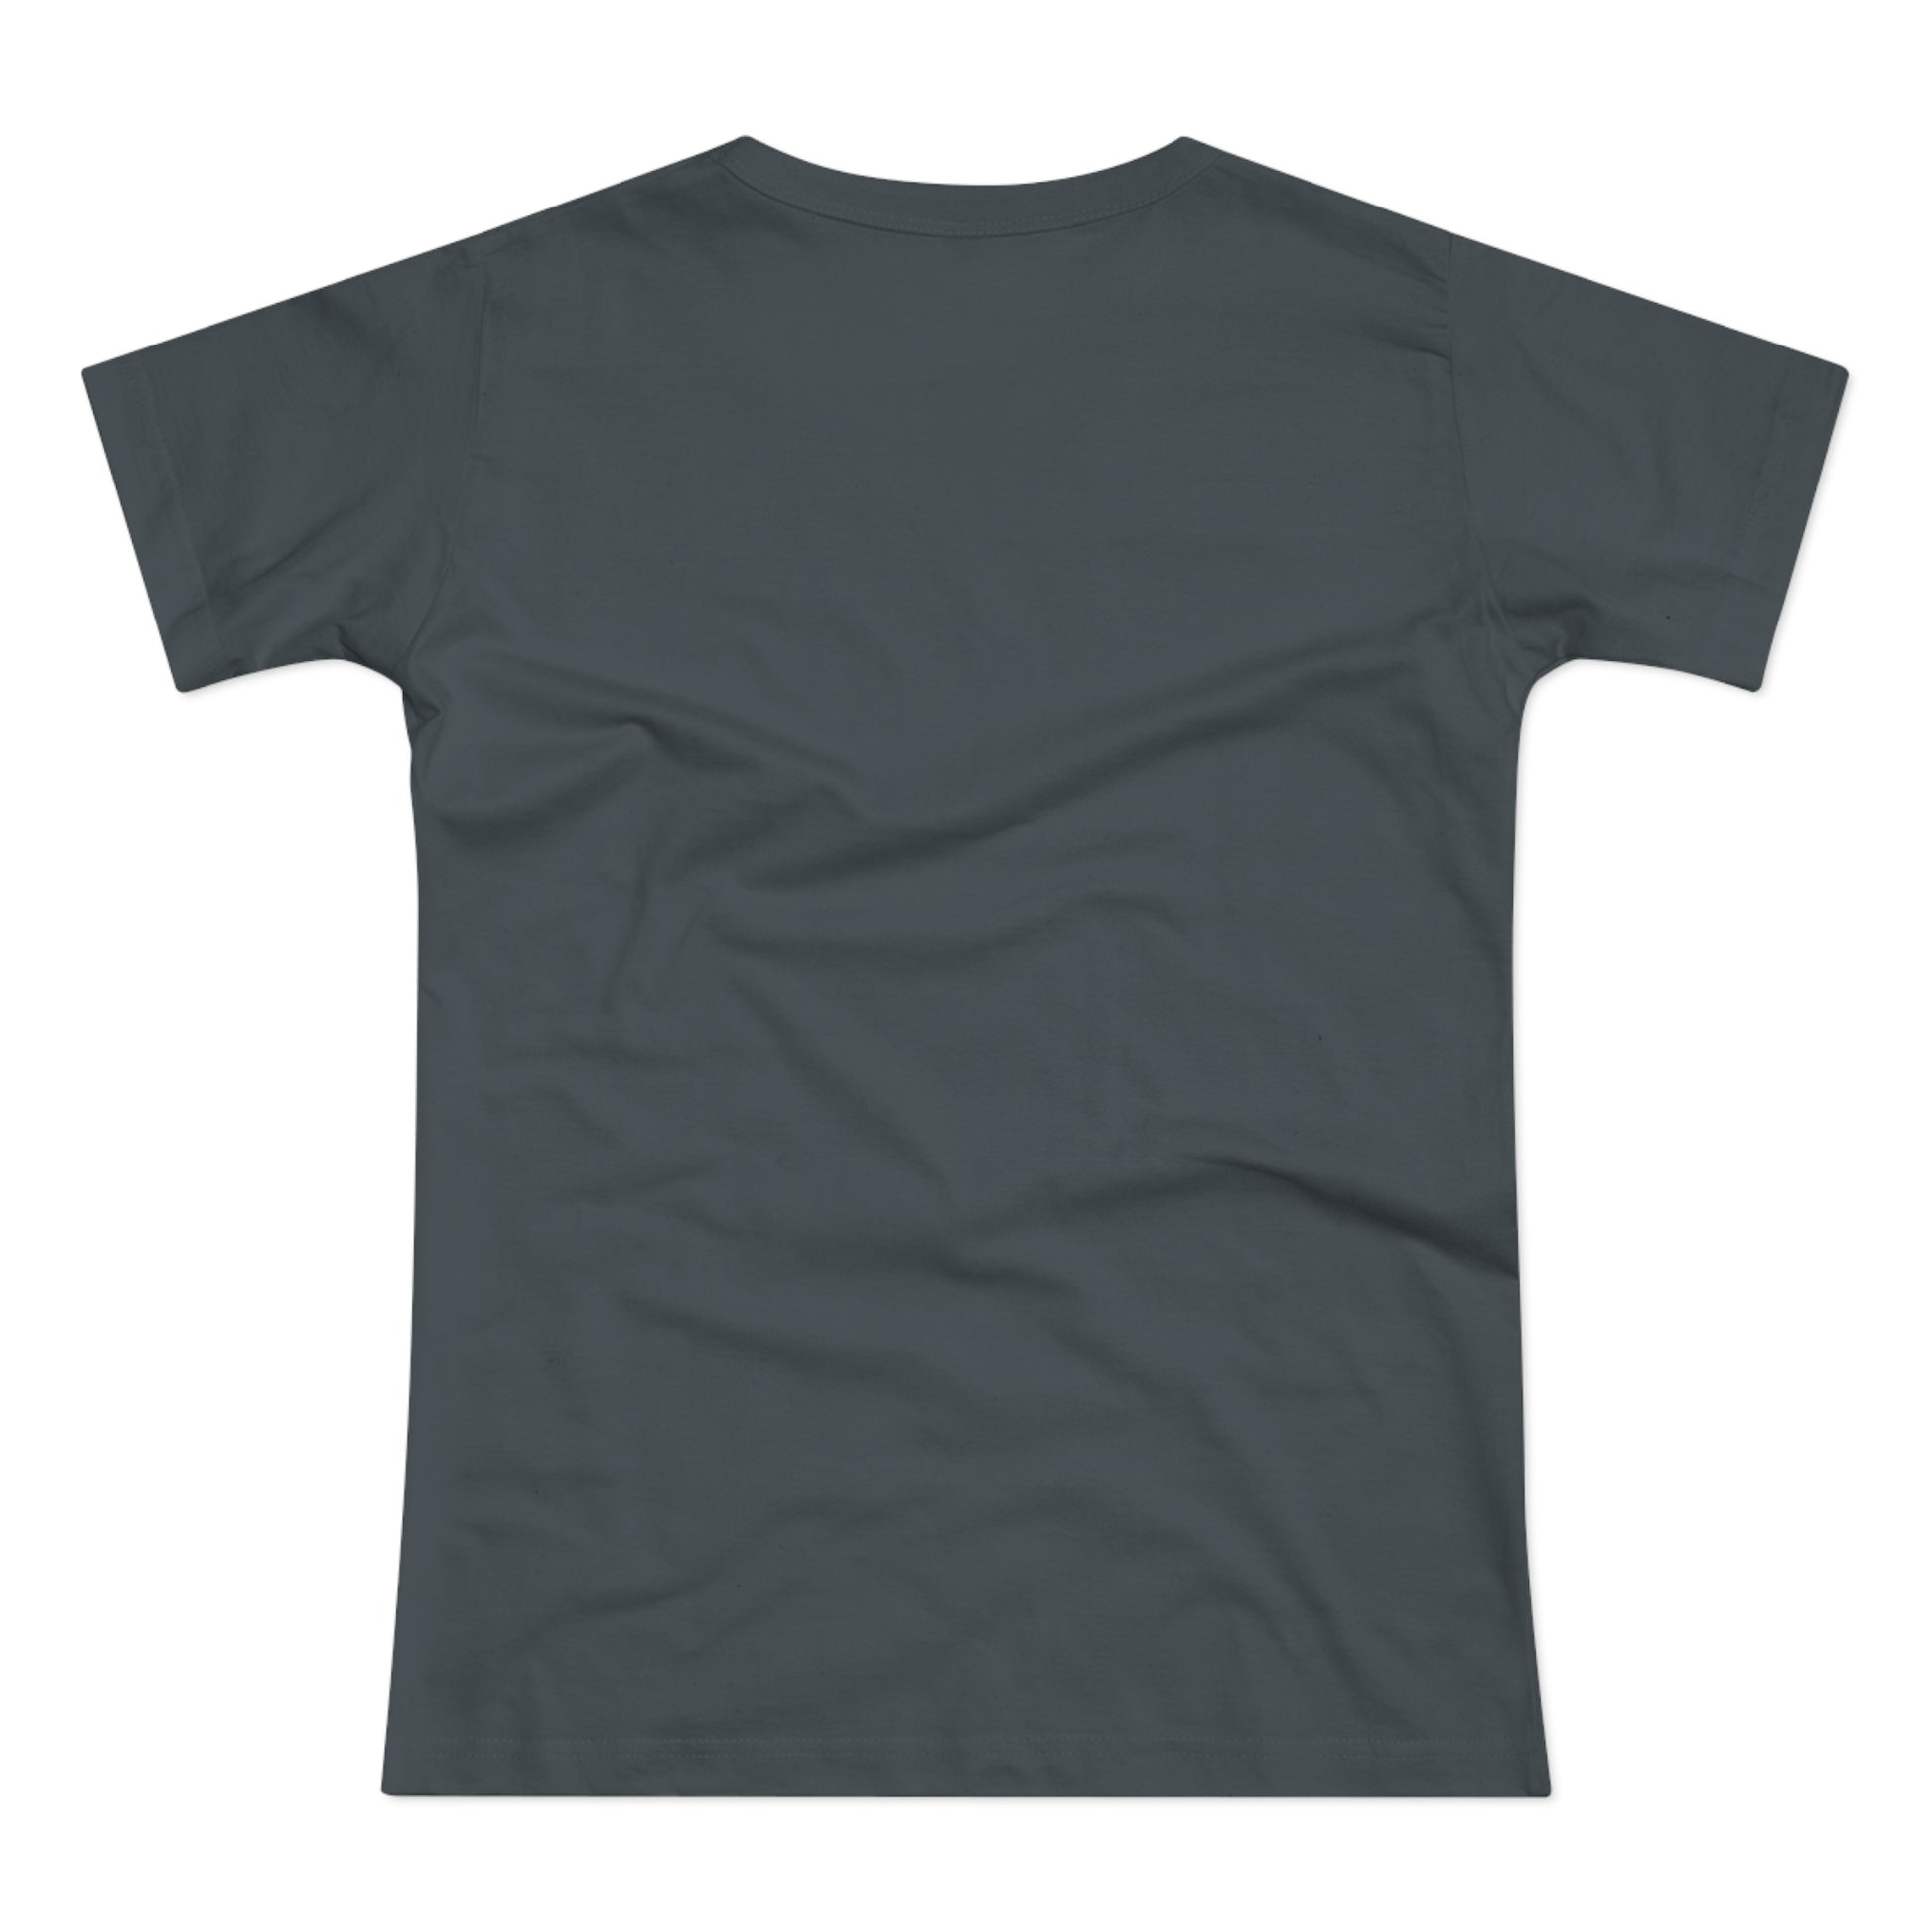 a grey t - shirt with a white background